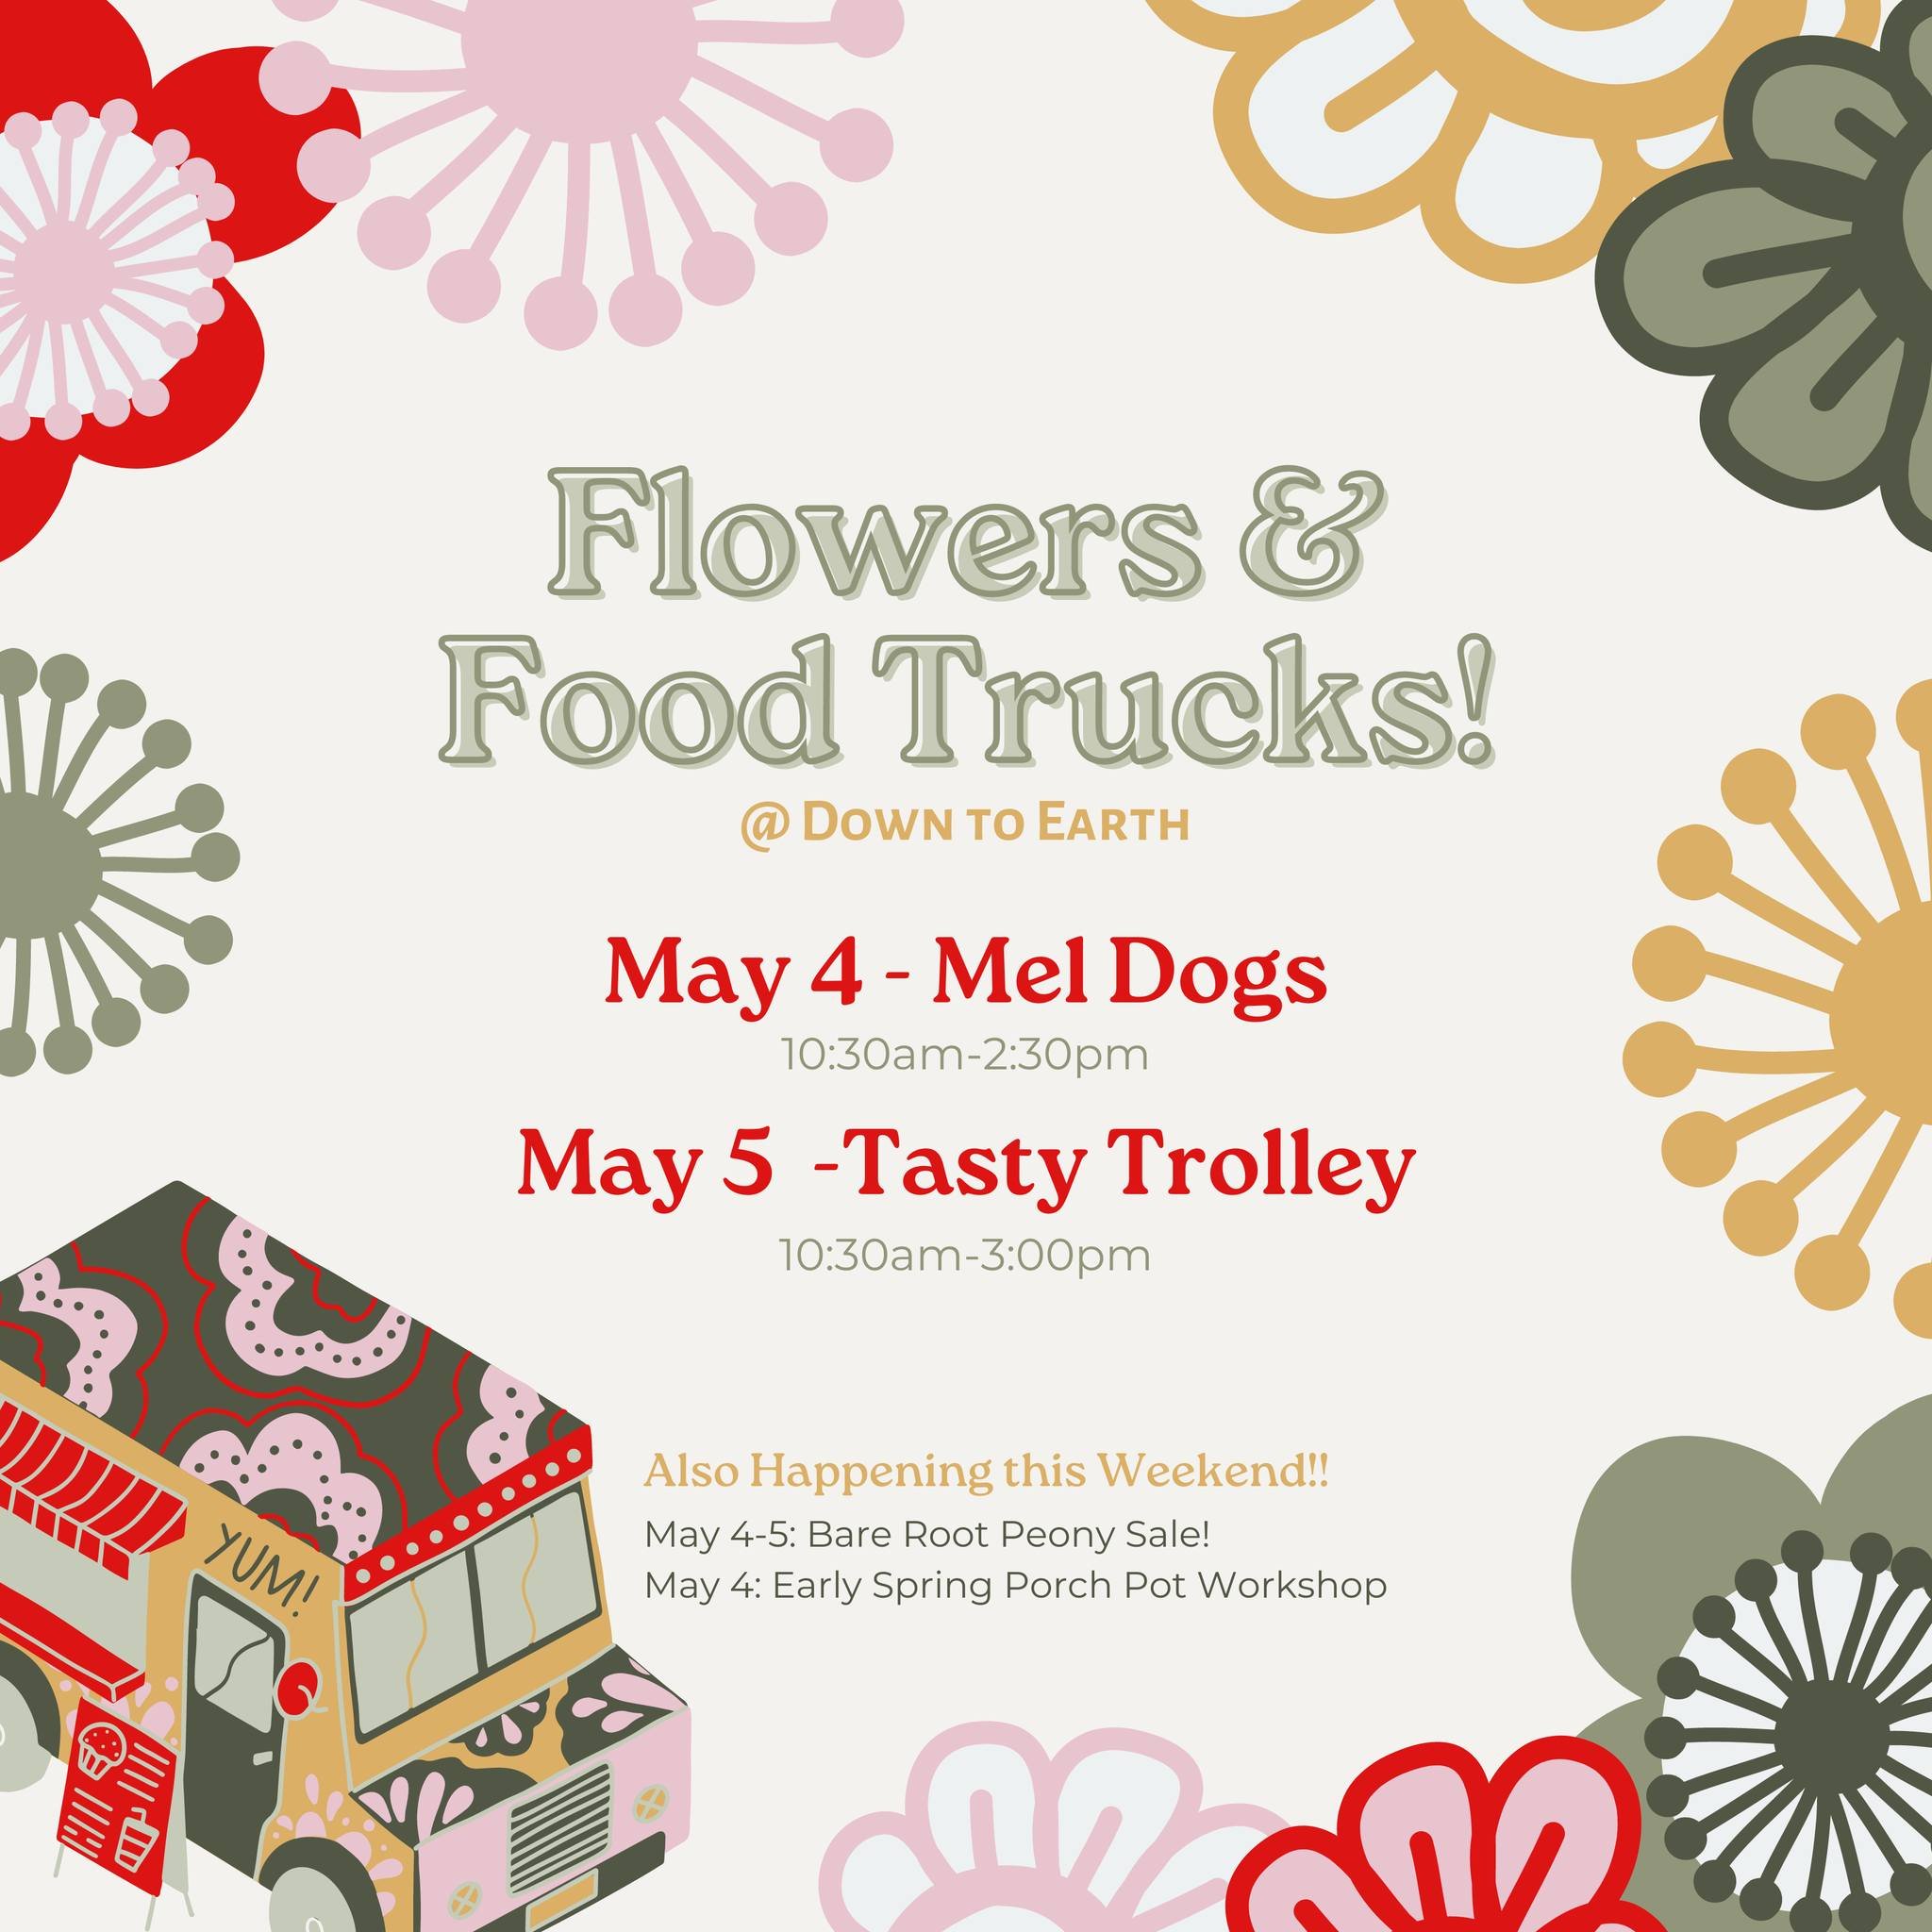 We've expanded your Saturday/Sunday dining options for the month of May with Flowers + Food Trucks! 🌸🌼🌺

In addition to our Five &amp; Two Cafe, Mel Dogs, LLC &amp; Tasty Trolley will be on site this weekend! 😍

Mel serves up delicious hot dogs, 